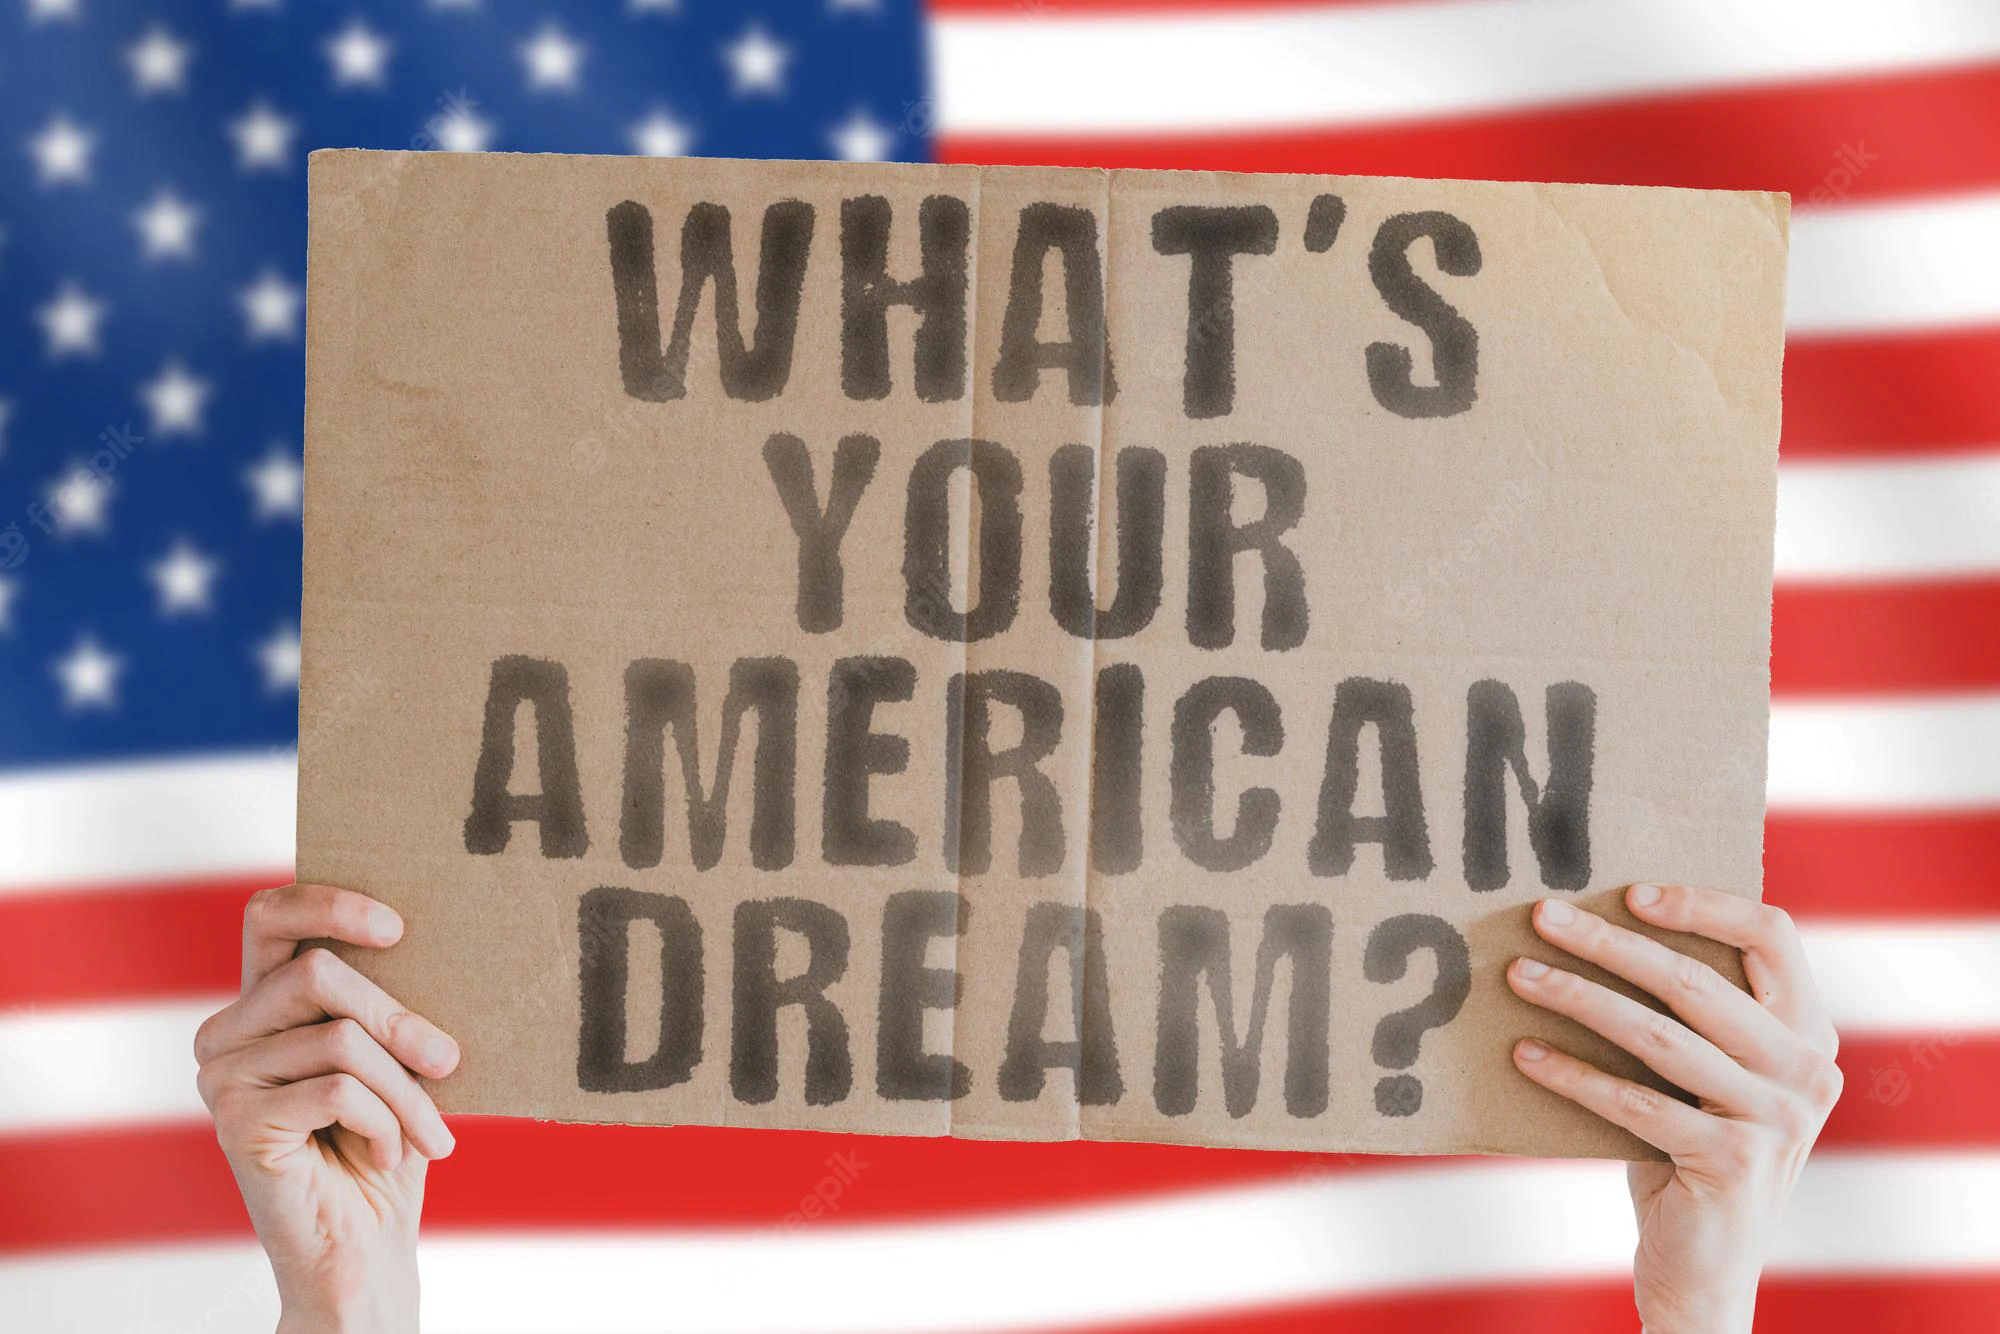 How to attain the American dream as a foriegner in America